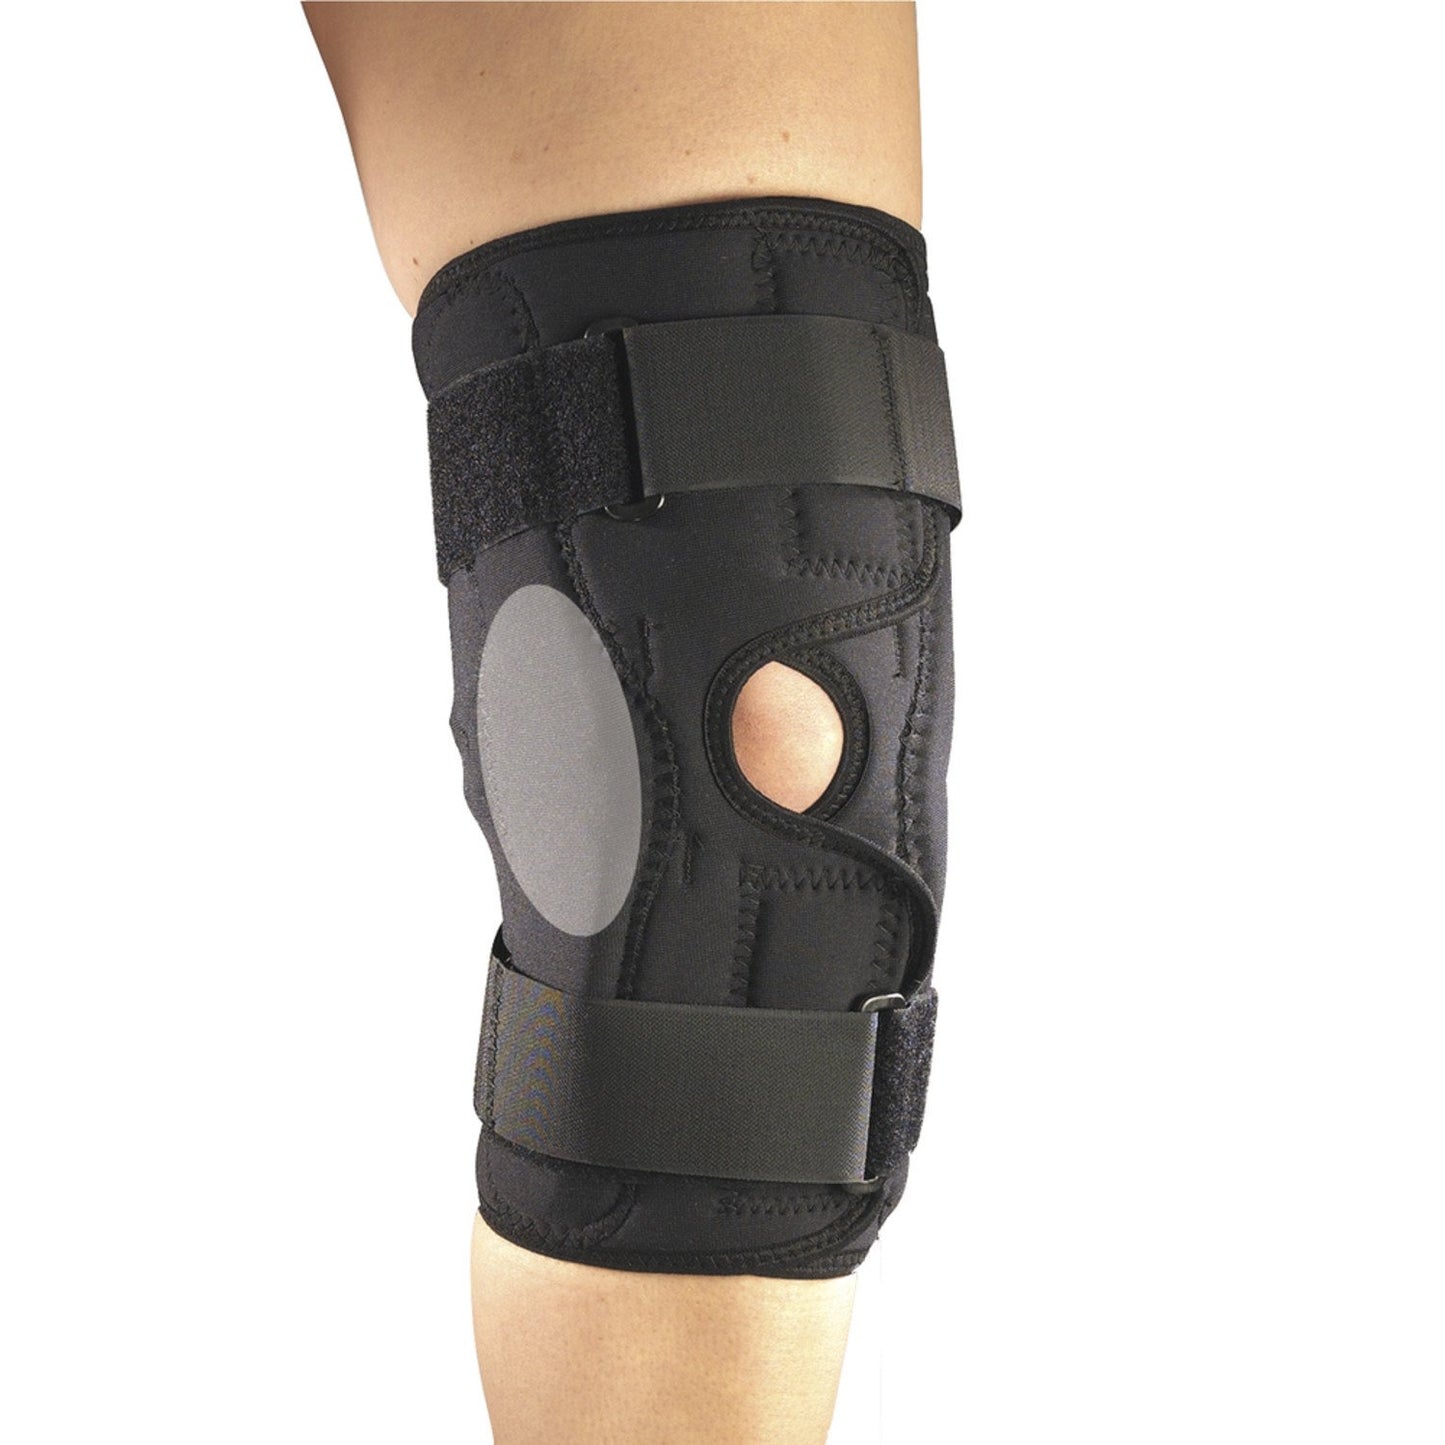 ORTHOTEX Advanced Knee Stabilizer Wrap with ROM Hinged Bars Ultimate Support for Joint Stability and Mobility